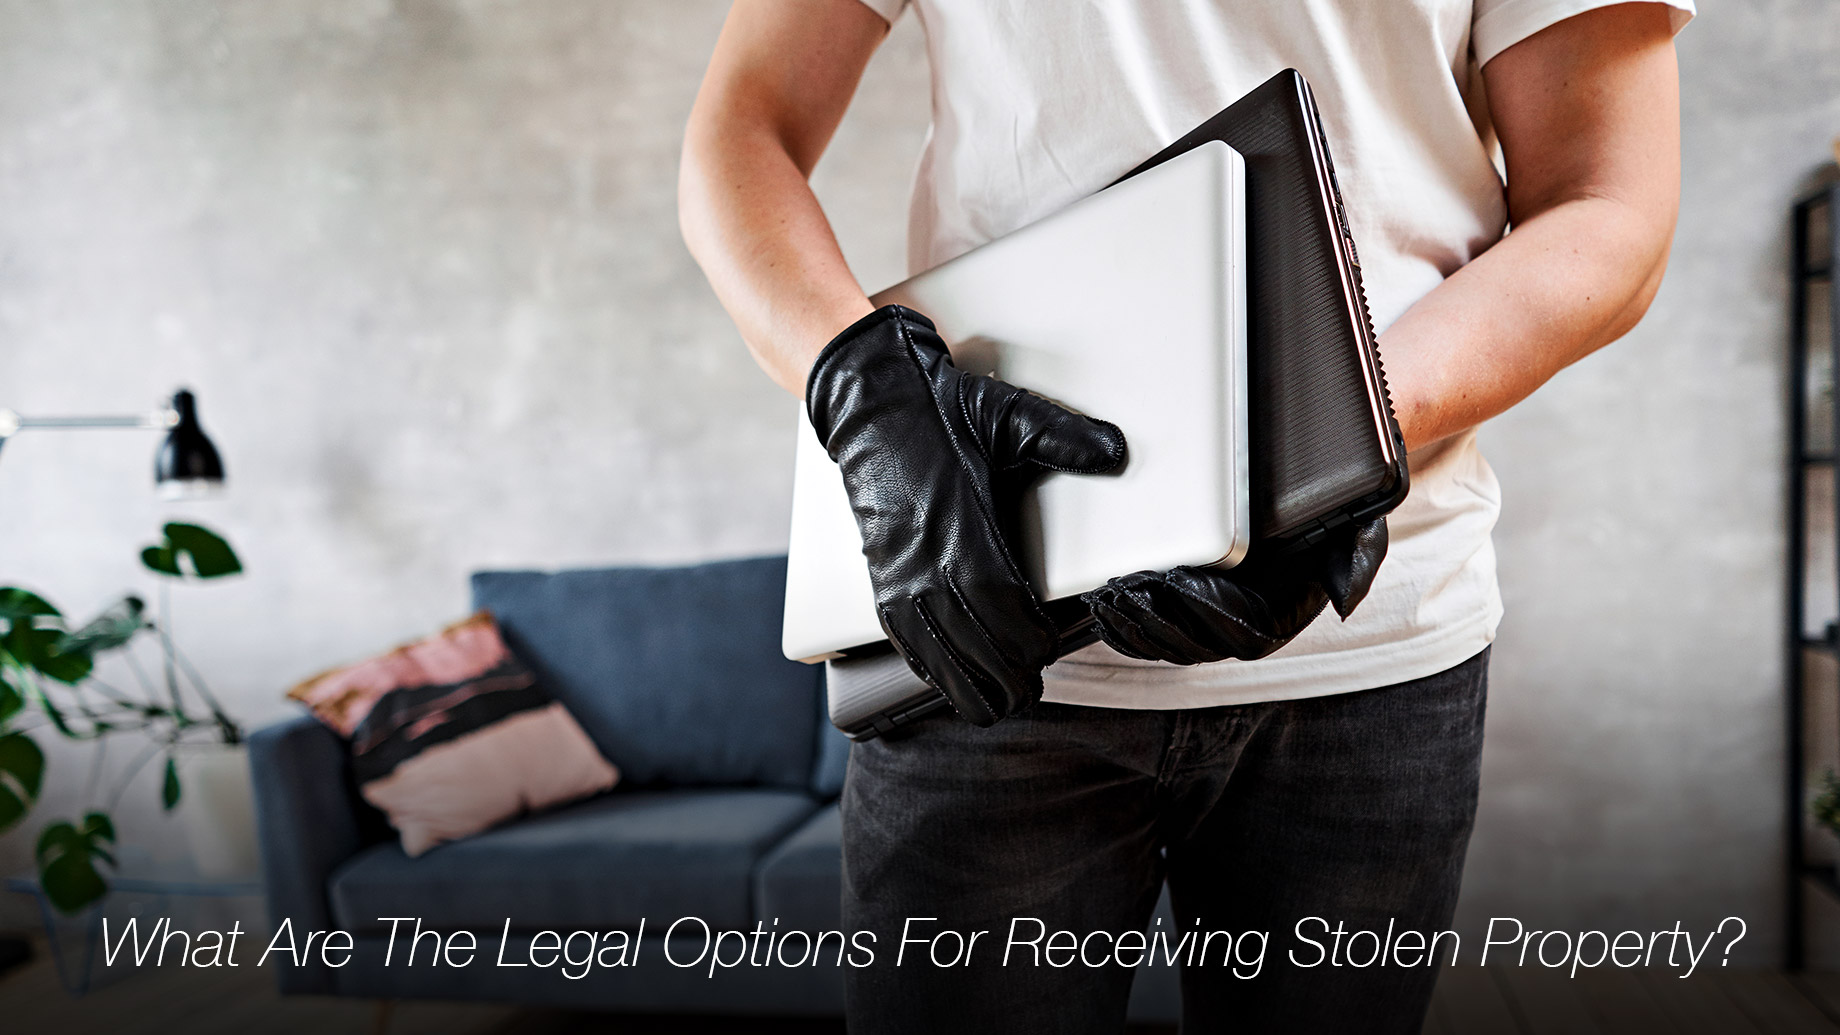 What Are The Legal Options For Receiving Stolen Property?